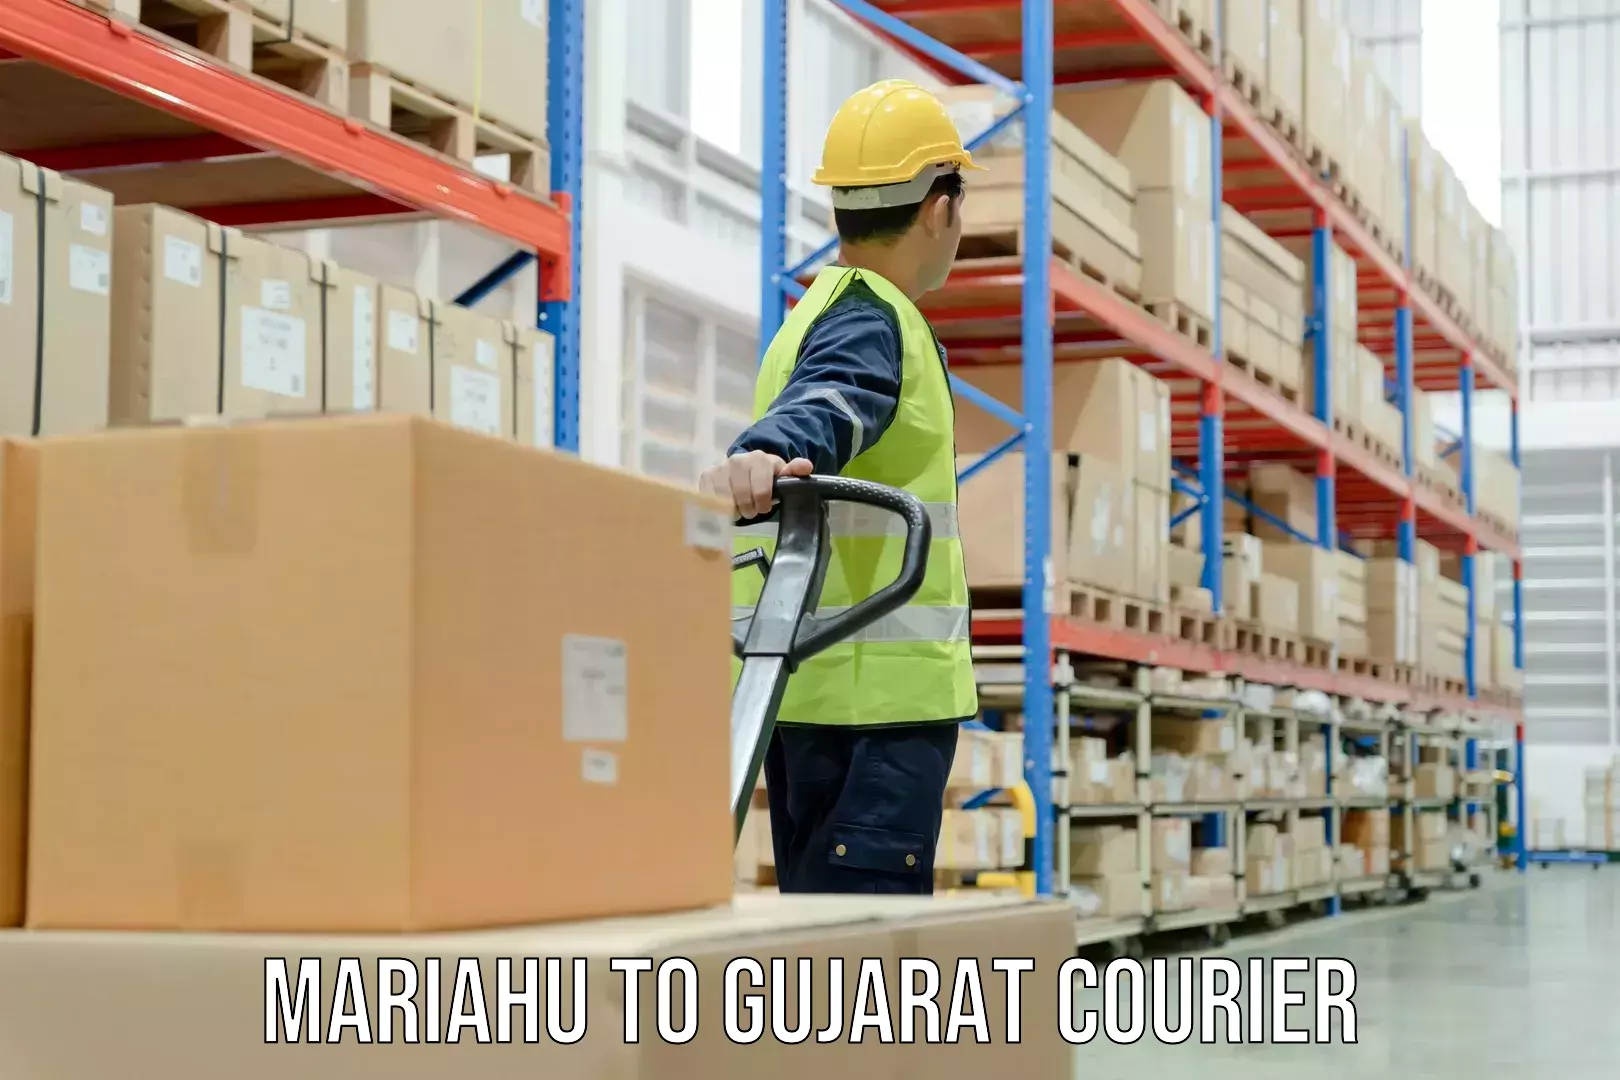 Subscription-based courier Mariahu to Gujarat